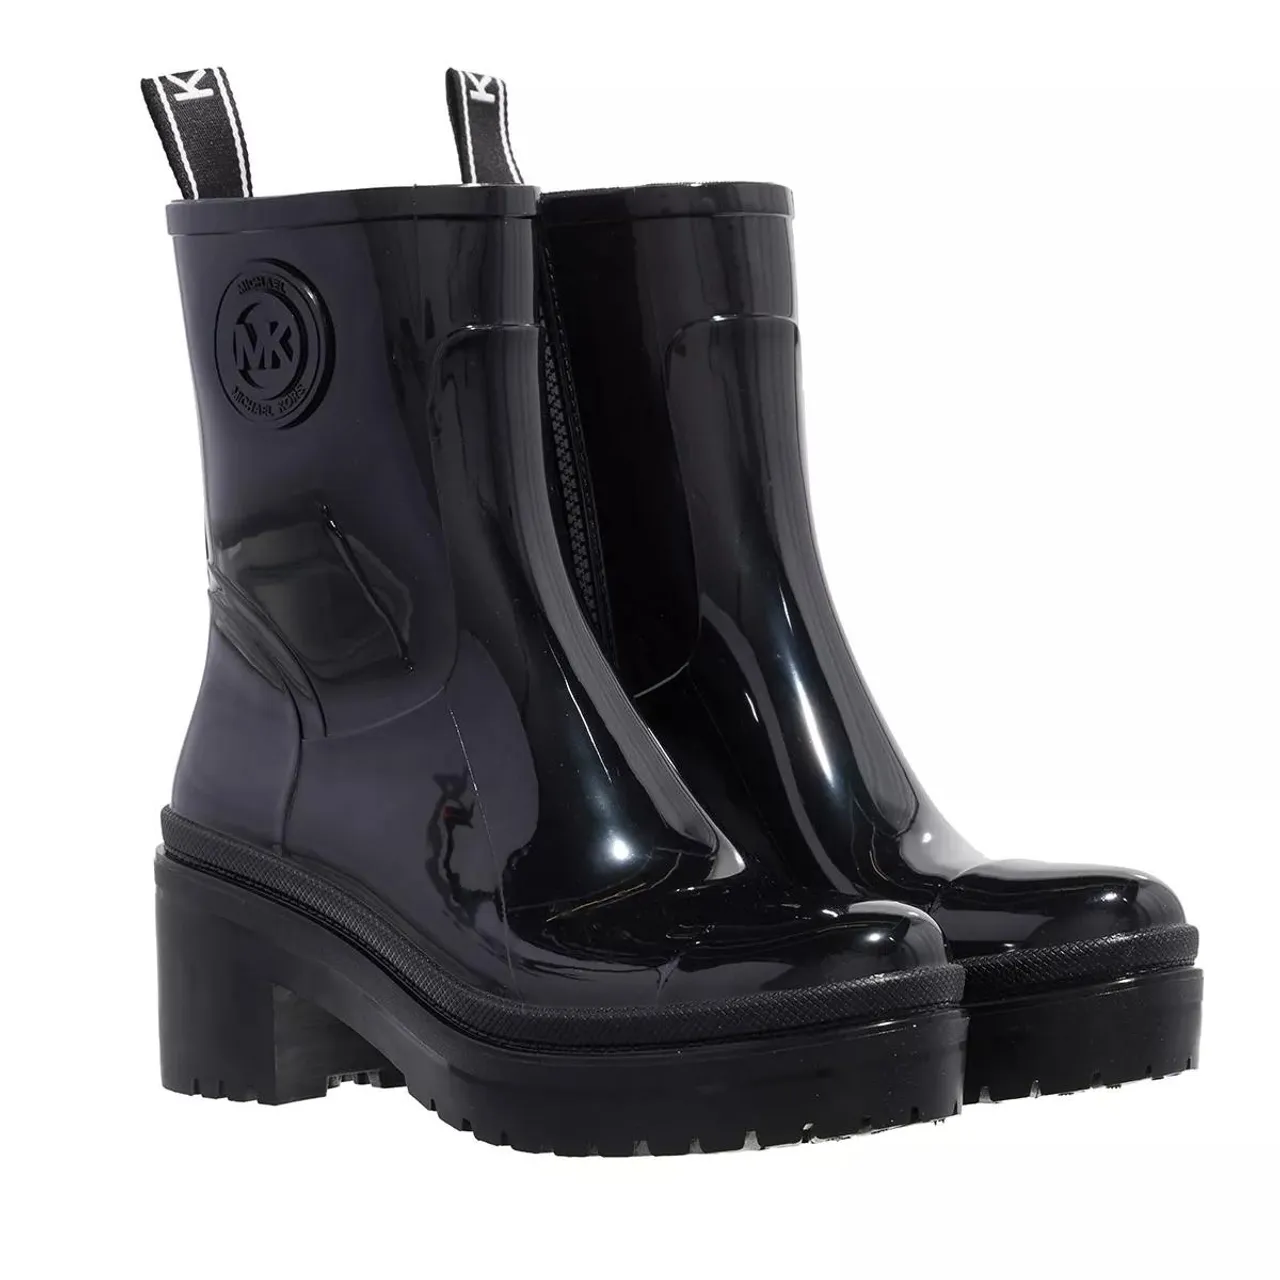 Michael Kors Boots & Ankle Boots - Karis Rainboot - black - Boots & Ankle Boots for ladies